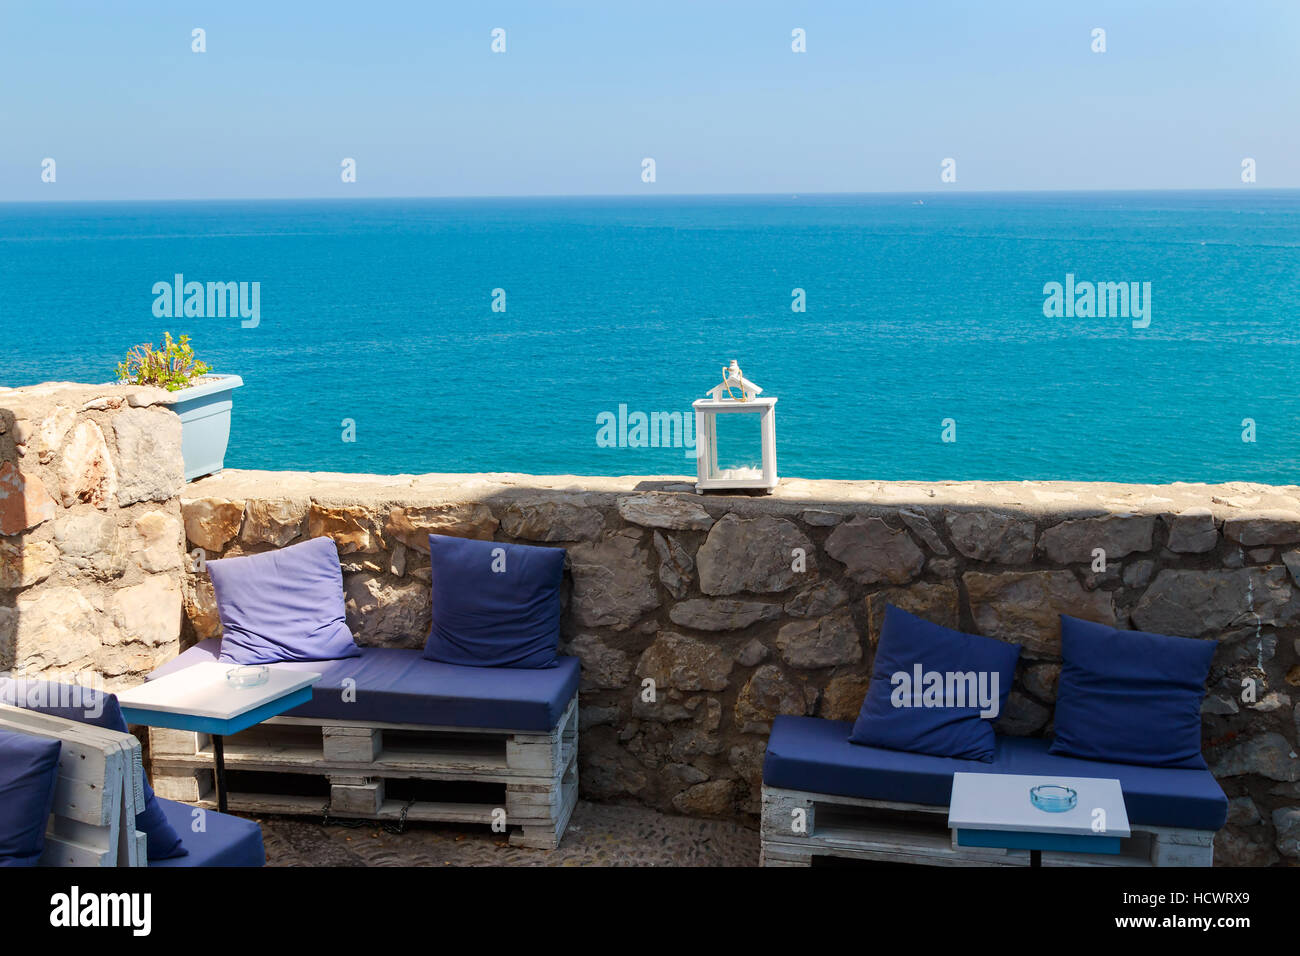 Restaurant with summer terrace and sea views. Horizontal image. Stock Photo